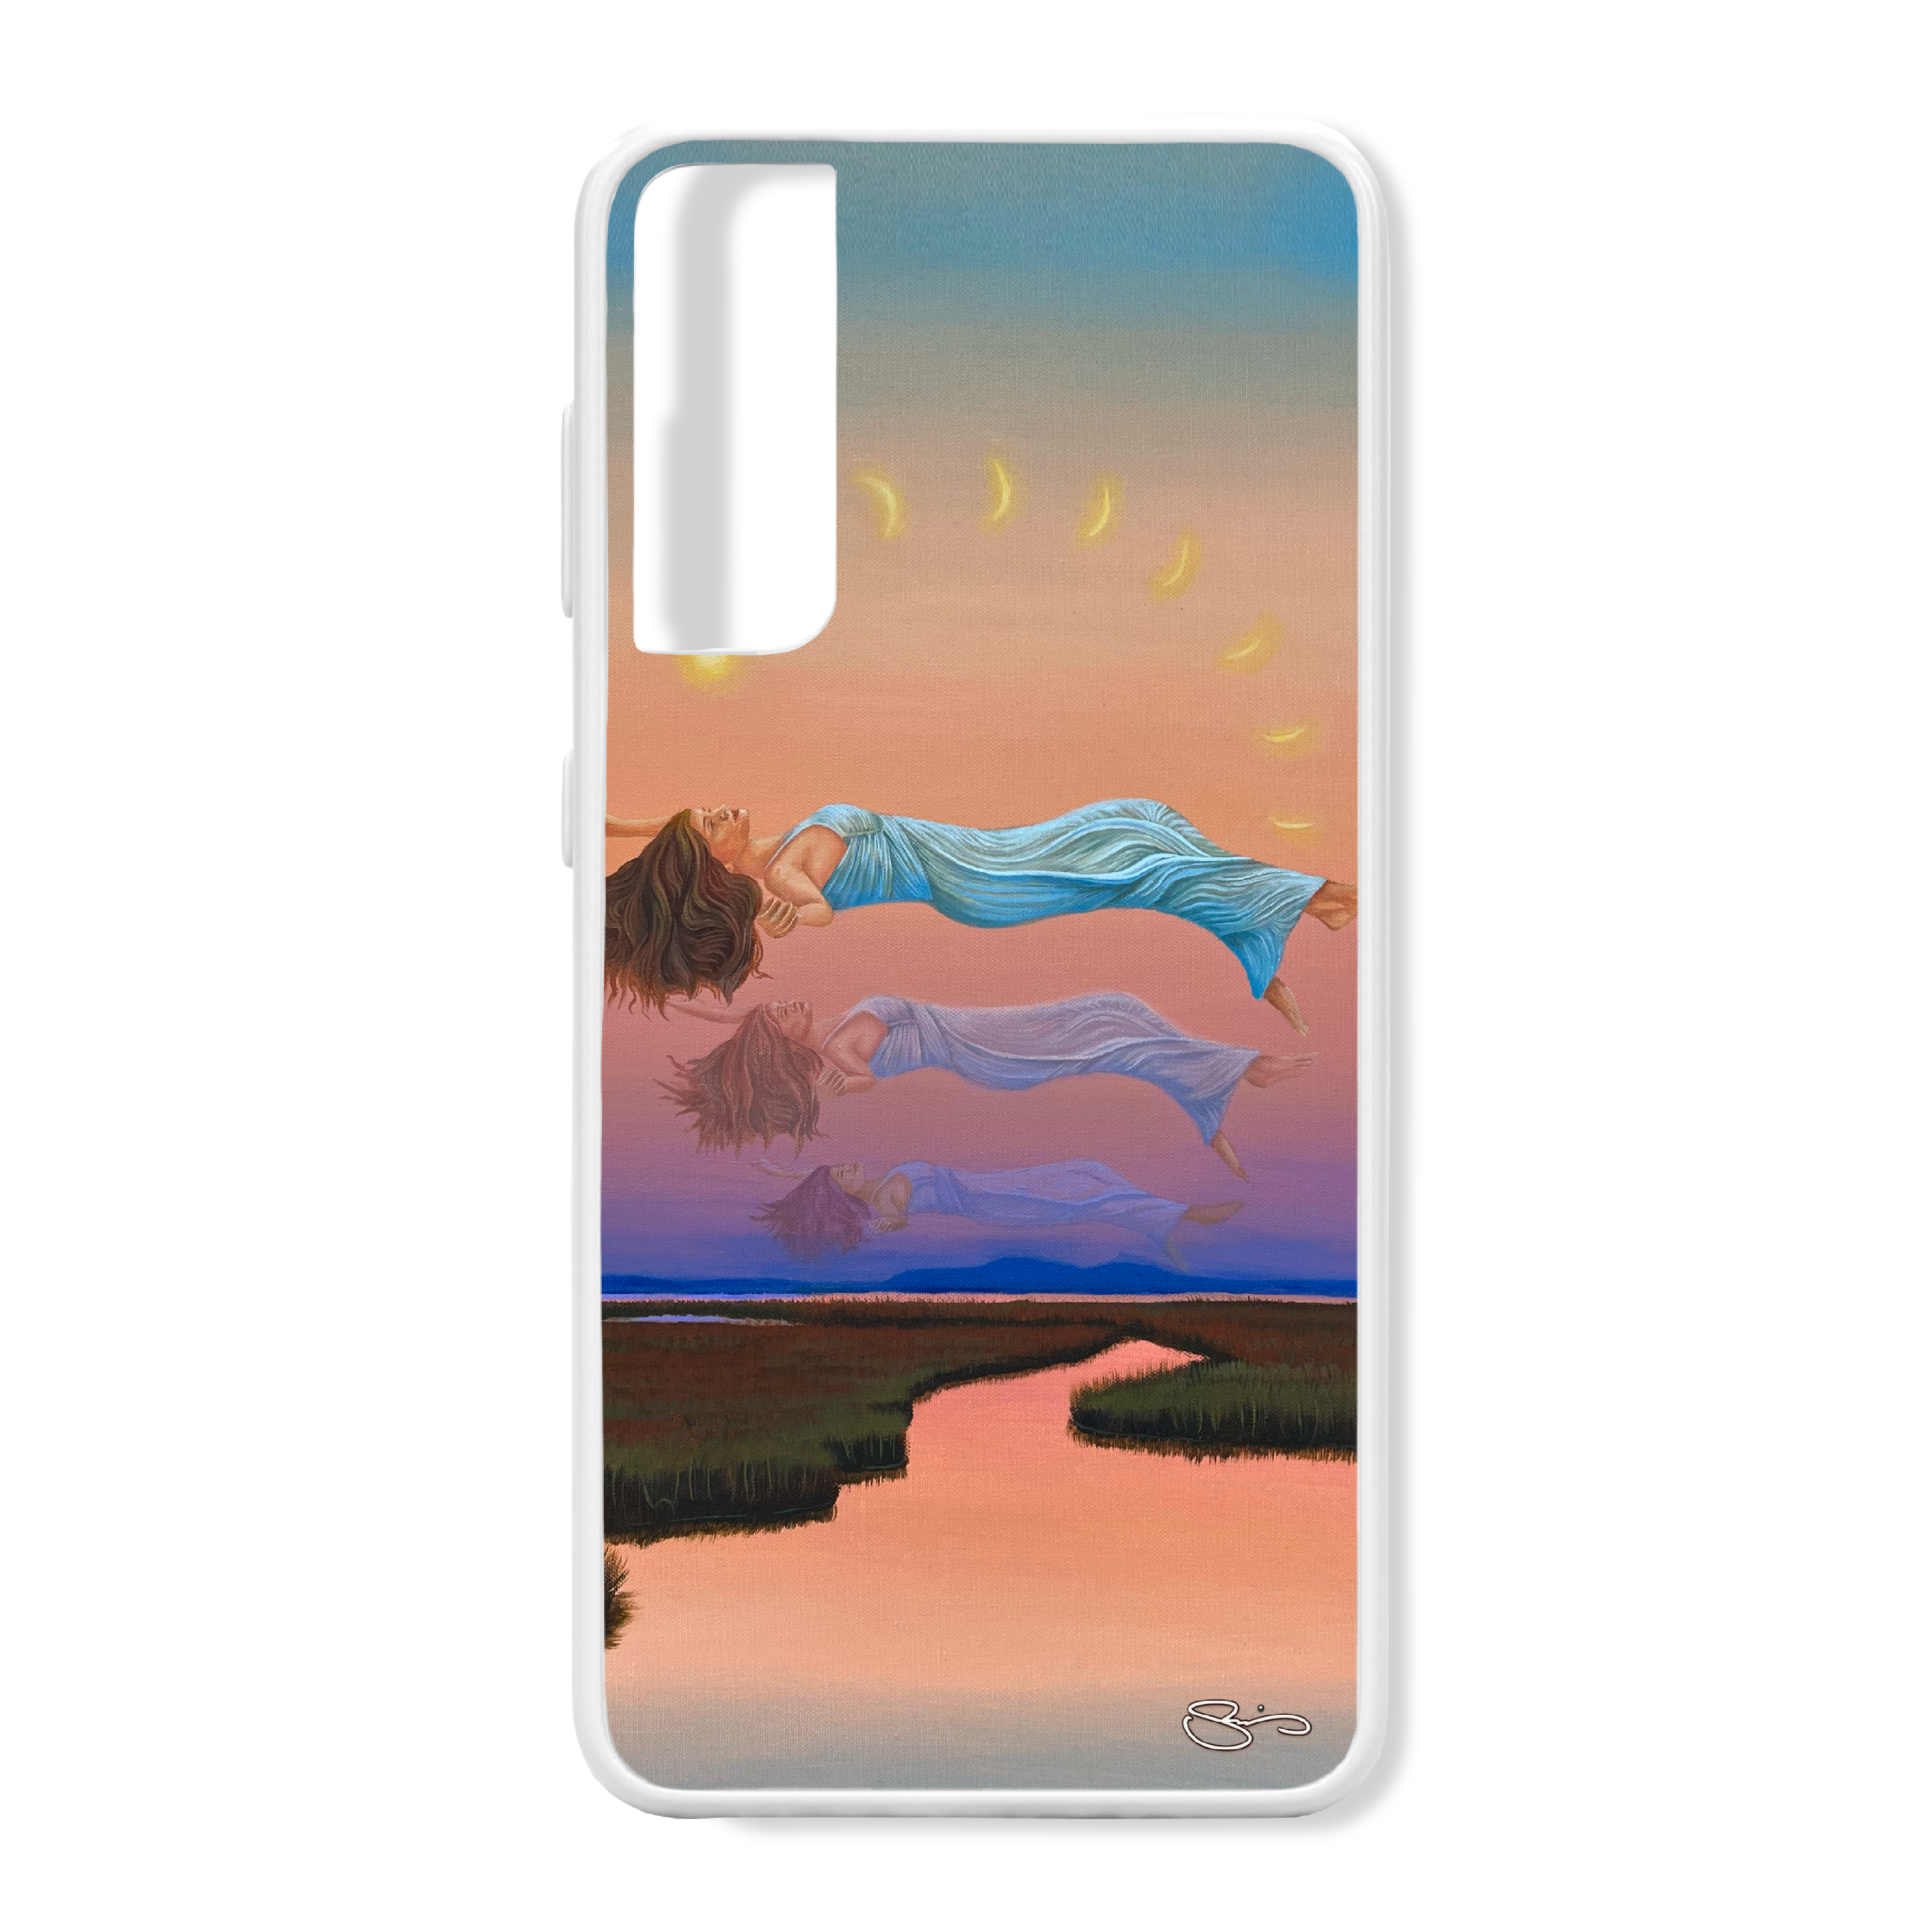 Reflections Samsung Case